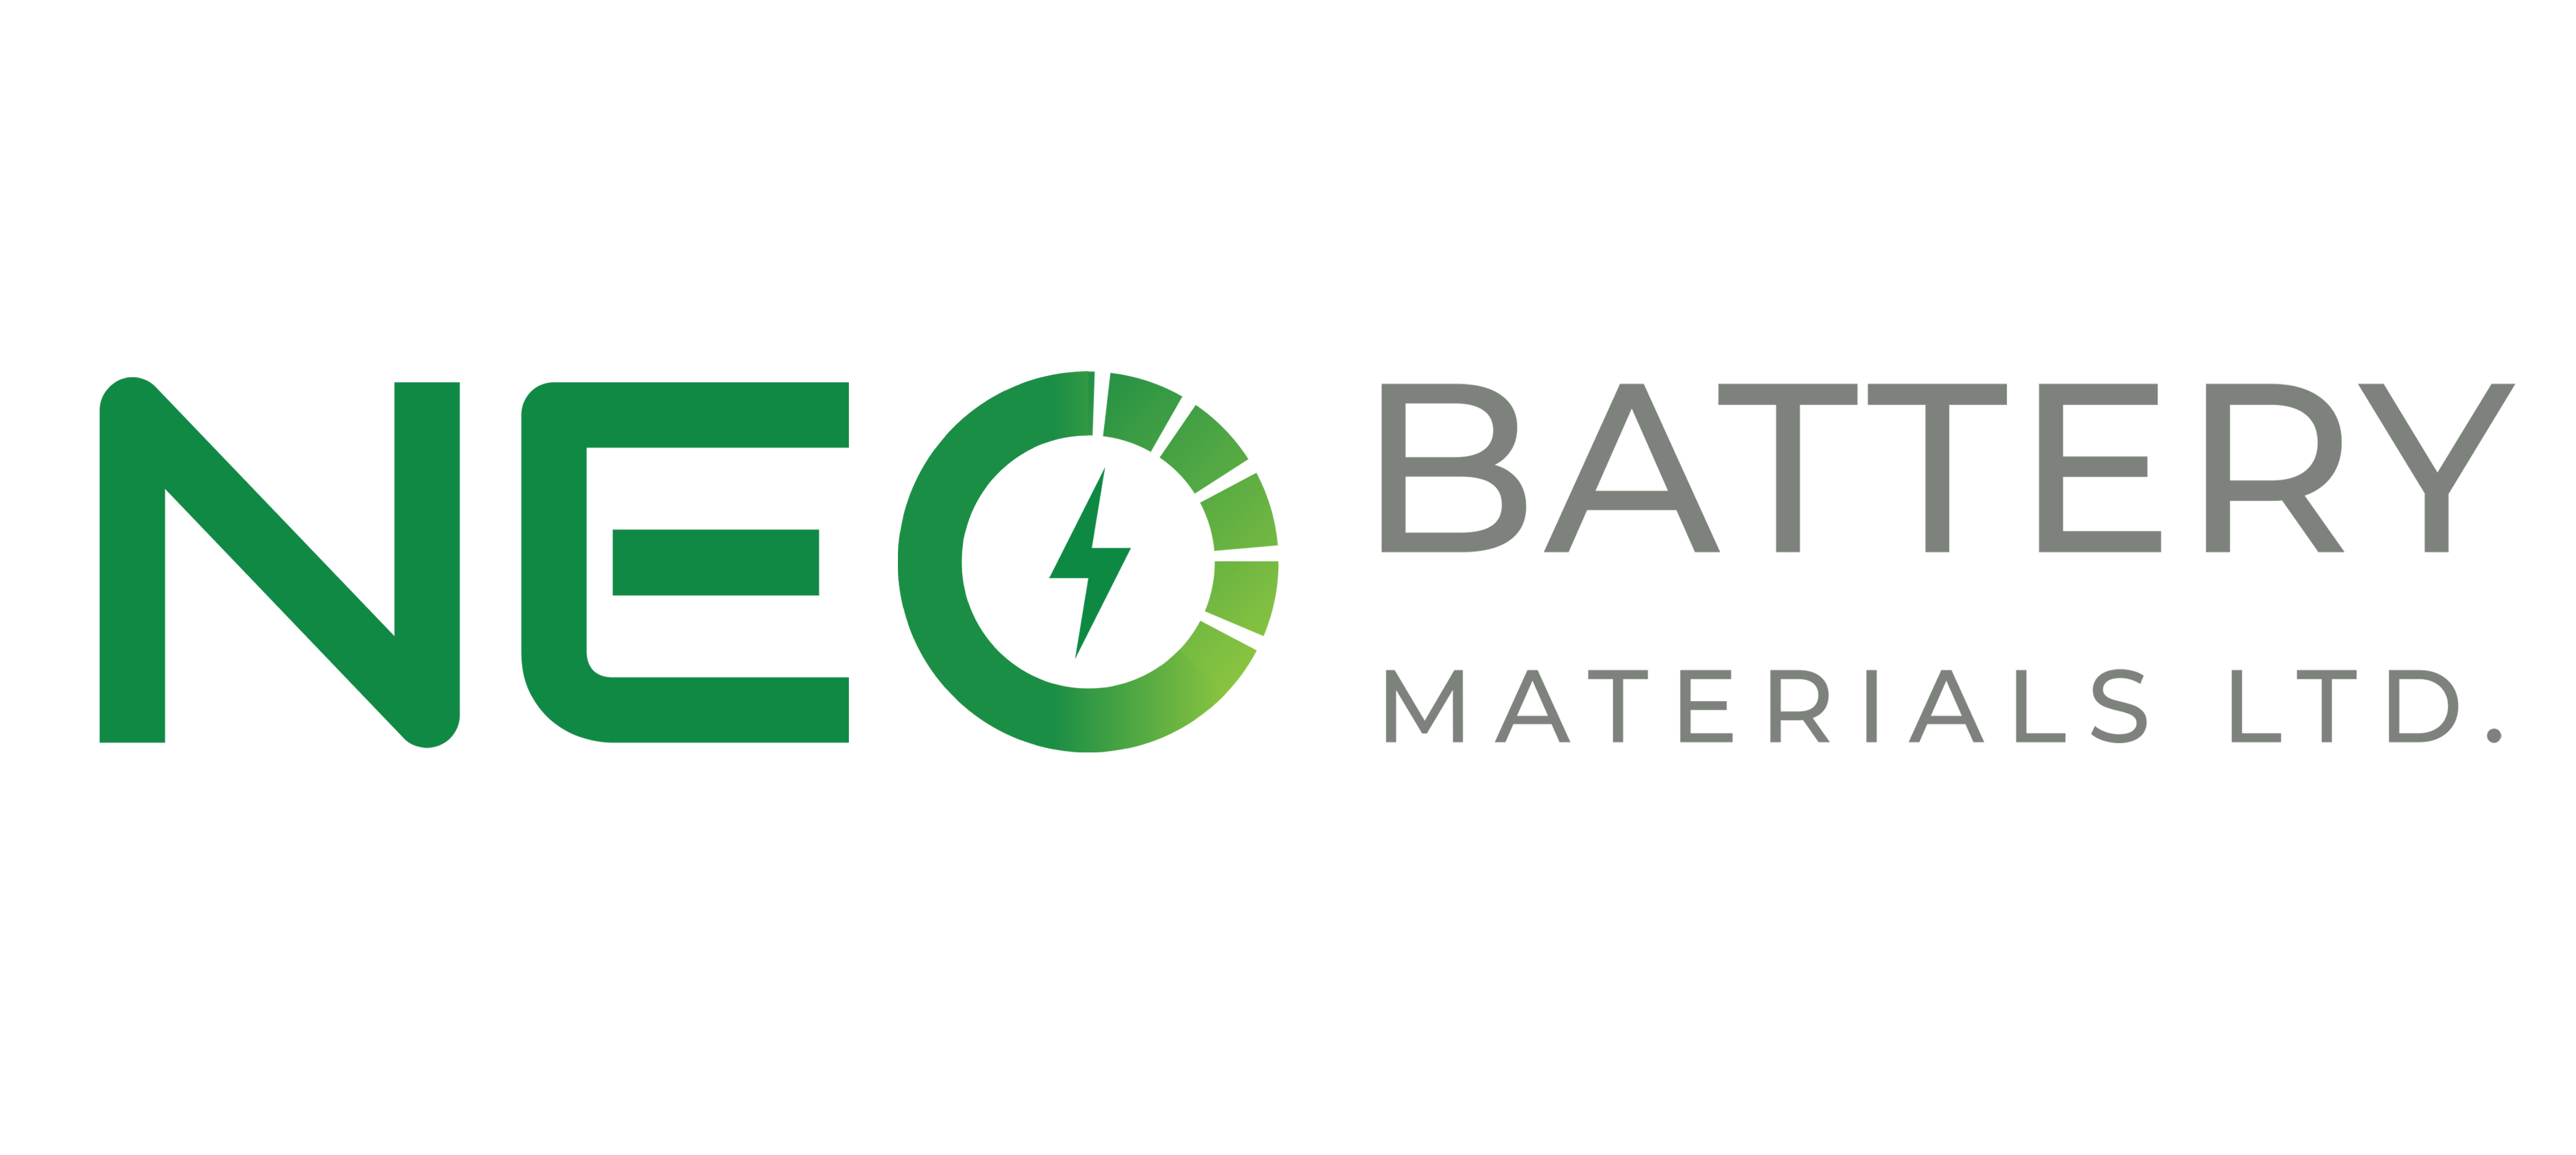 NEO Battery Materials Grants Incentive Stock Options to